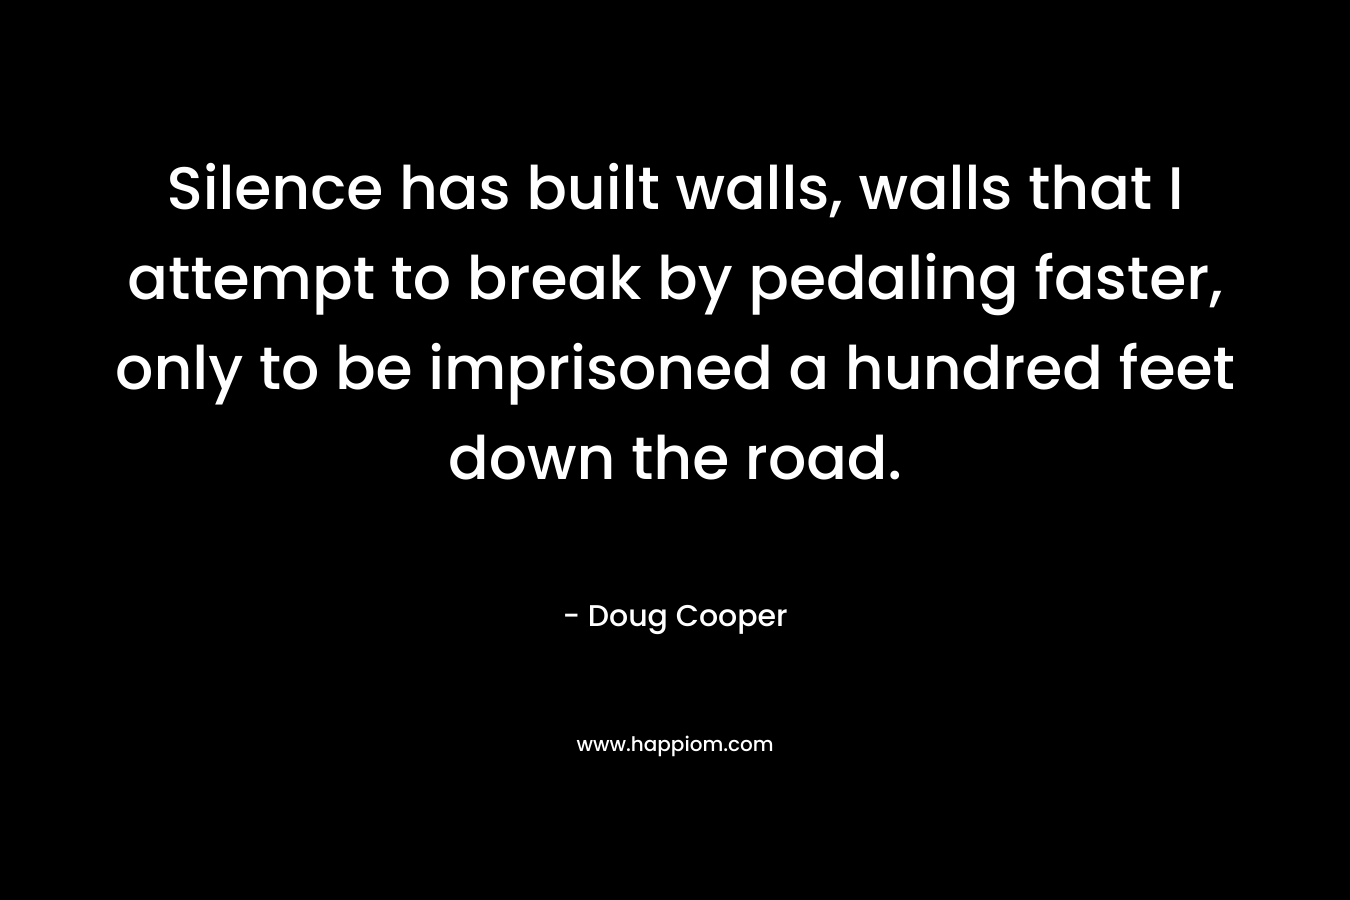 Silence has built walls, walls that I attempt to break by pedaling faster, only to be imprisoned a hundred feet down the road.